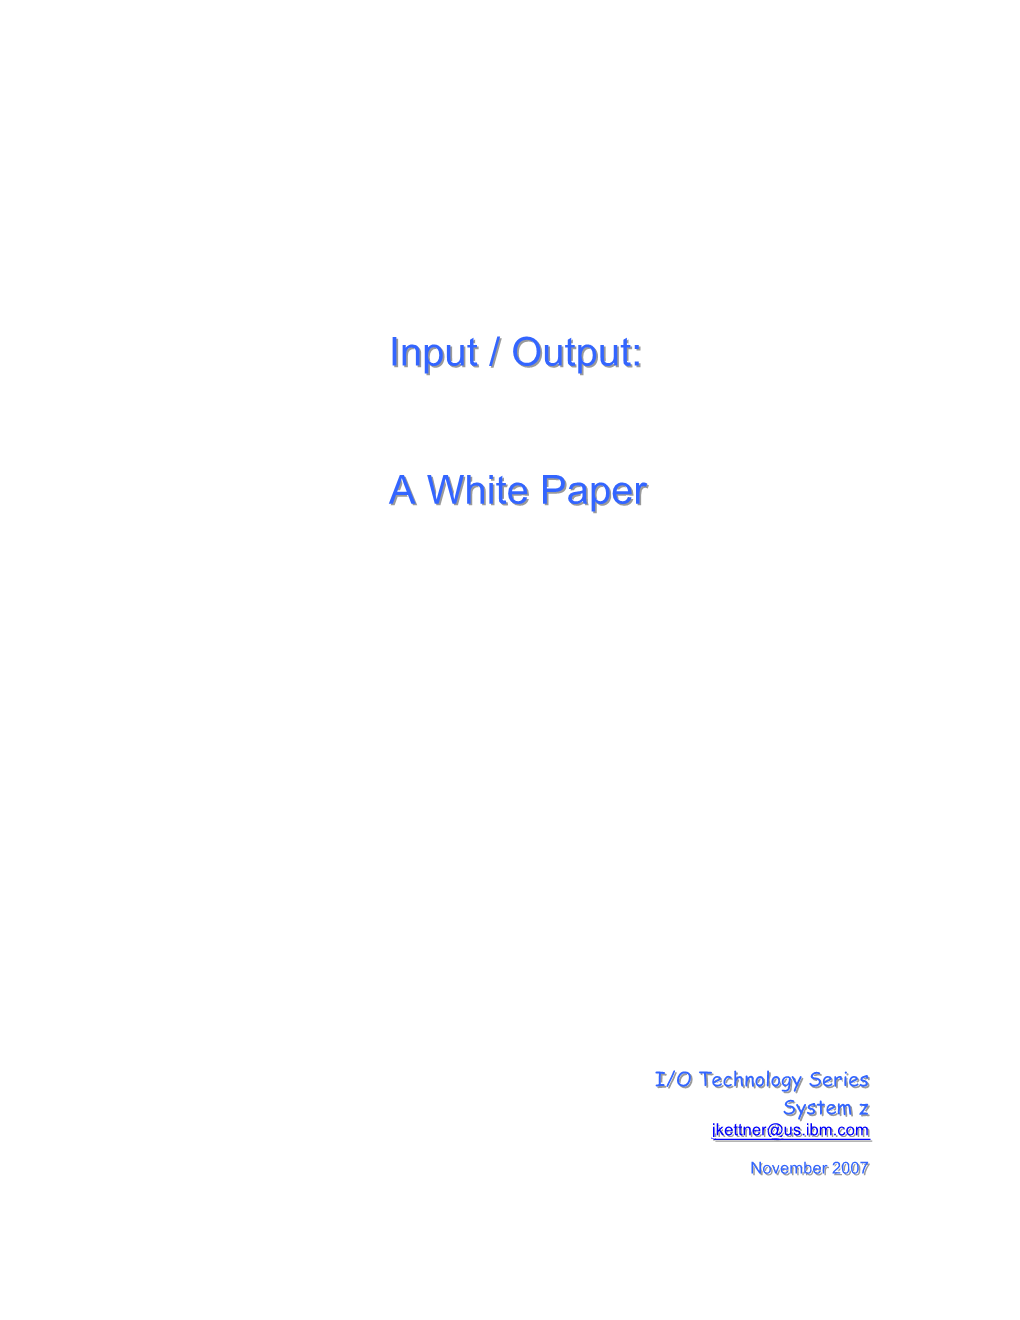 Input / Output: a White Paper